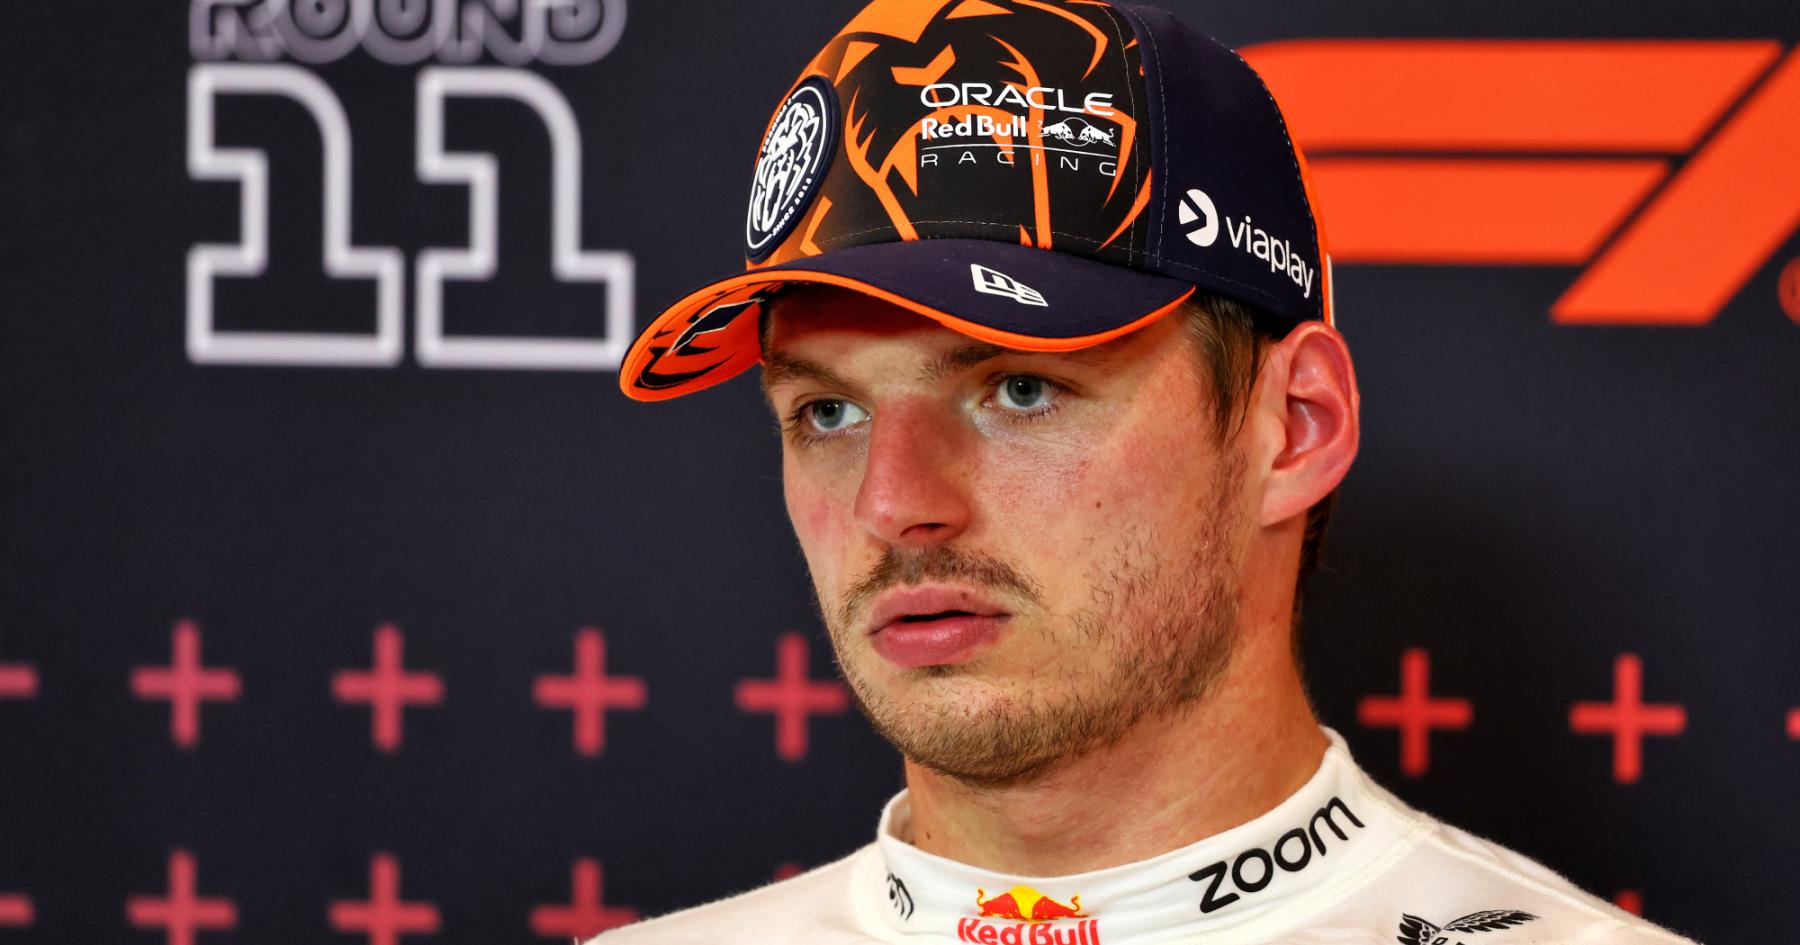 Verstappen Expresses Displeasure in Recent Conflict: A Regal Disapproval